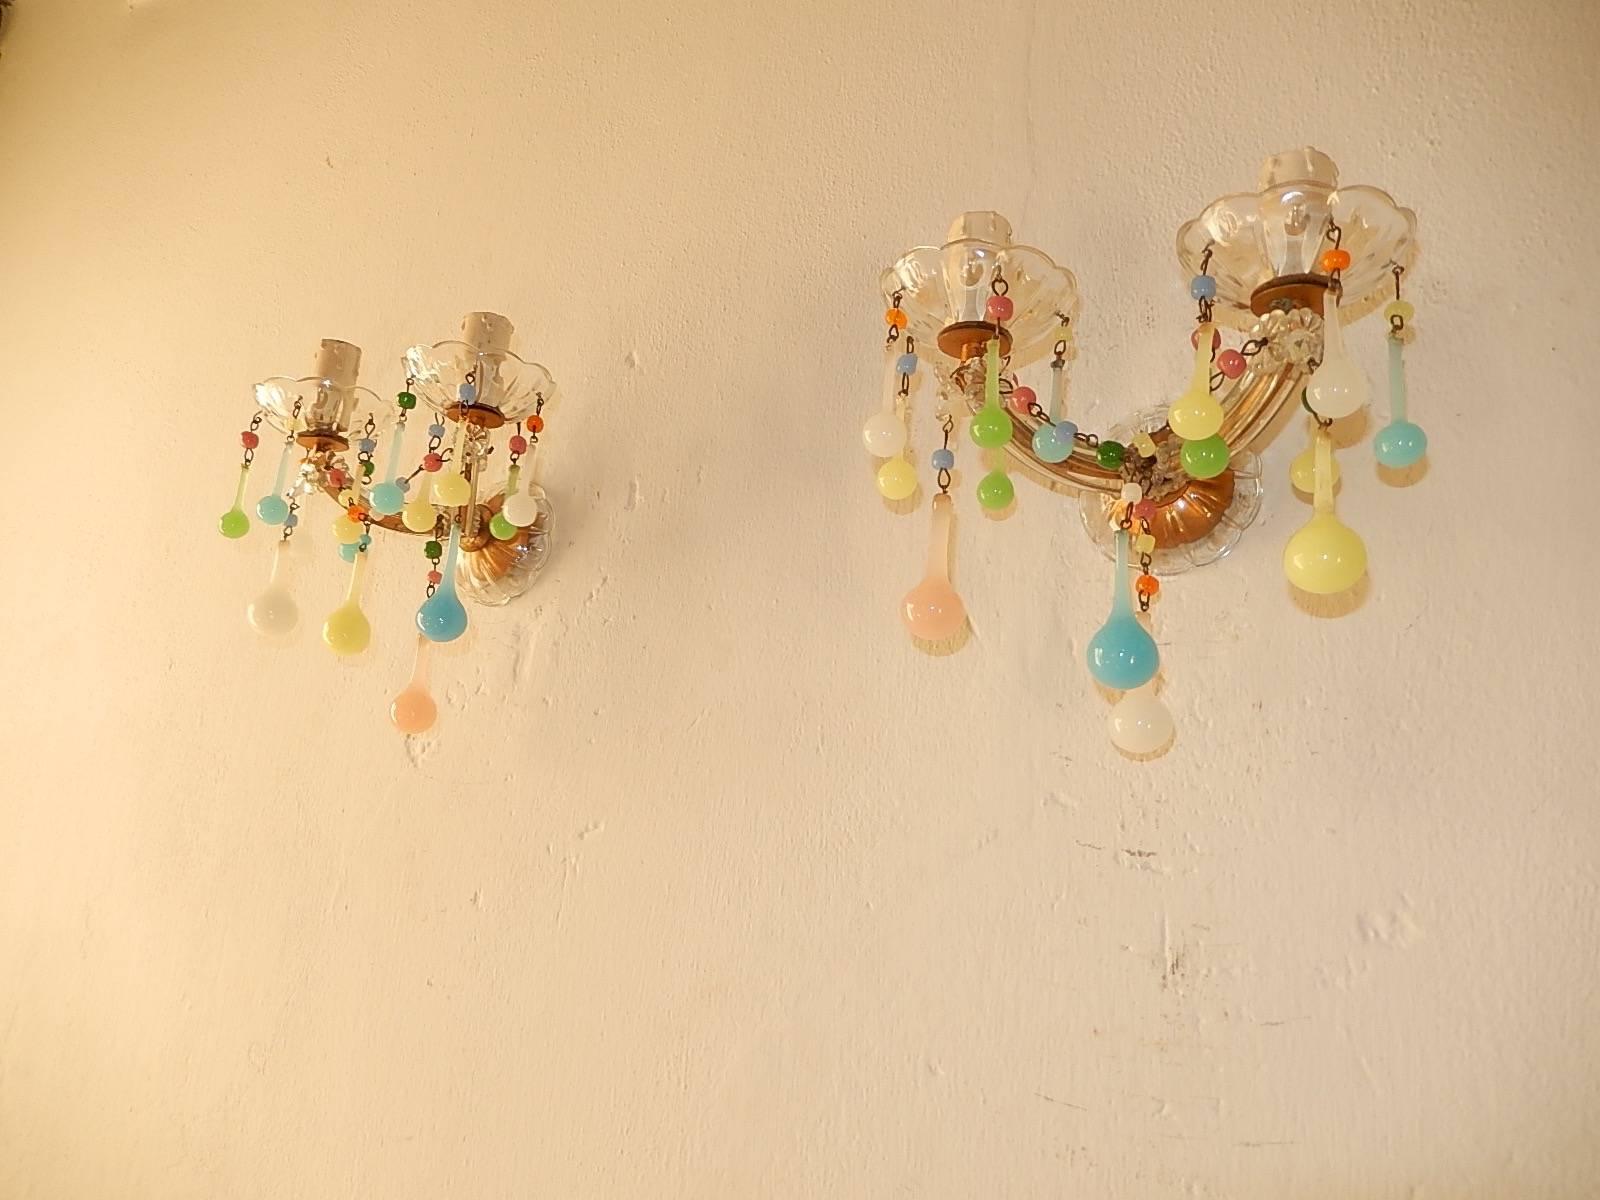 Housing 2 lights each in crystal bobeches.  Pastel opaline beads, drops and florets throughout.  Gilt metal body with Murano glass covering.  Matching chandelier will be listed soon.  Re-wired and ready to hang.  Free priority shipping from Italy.